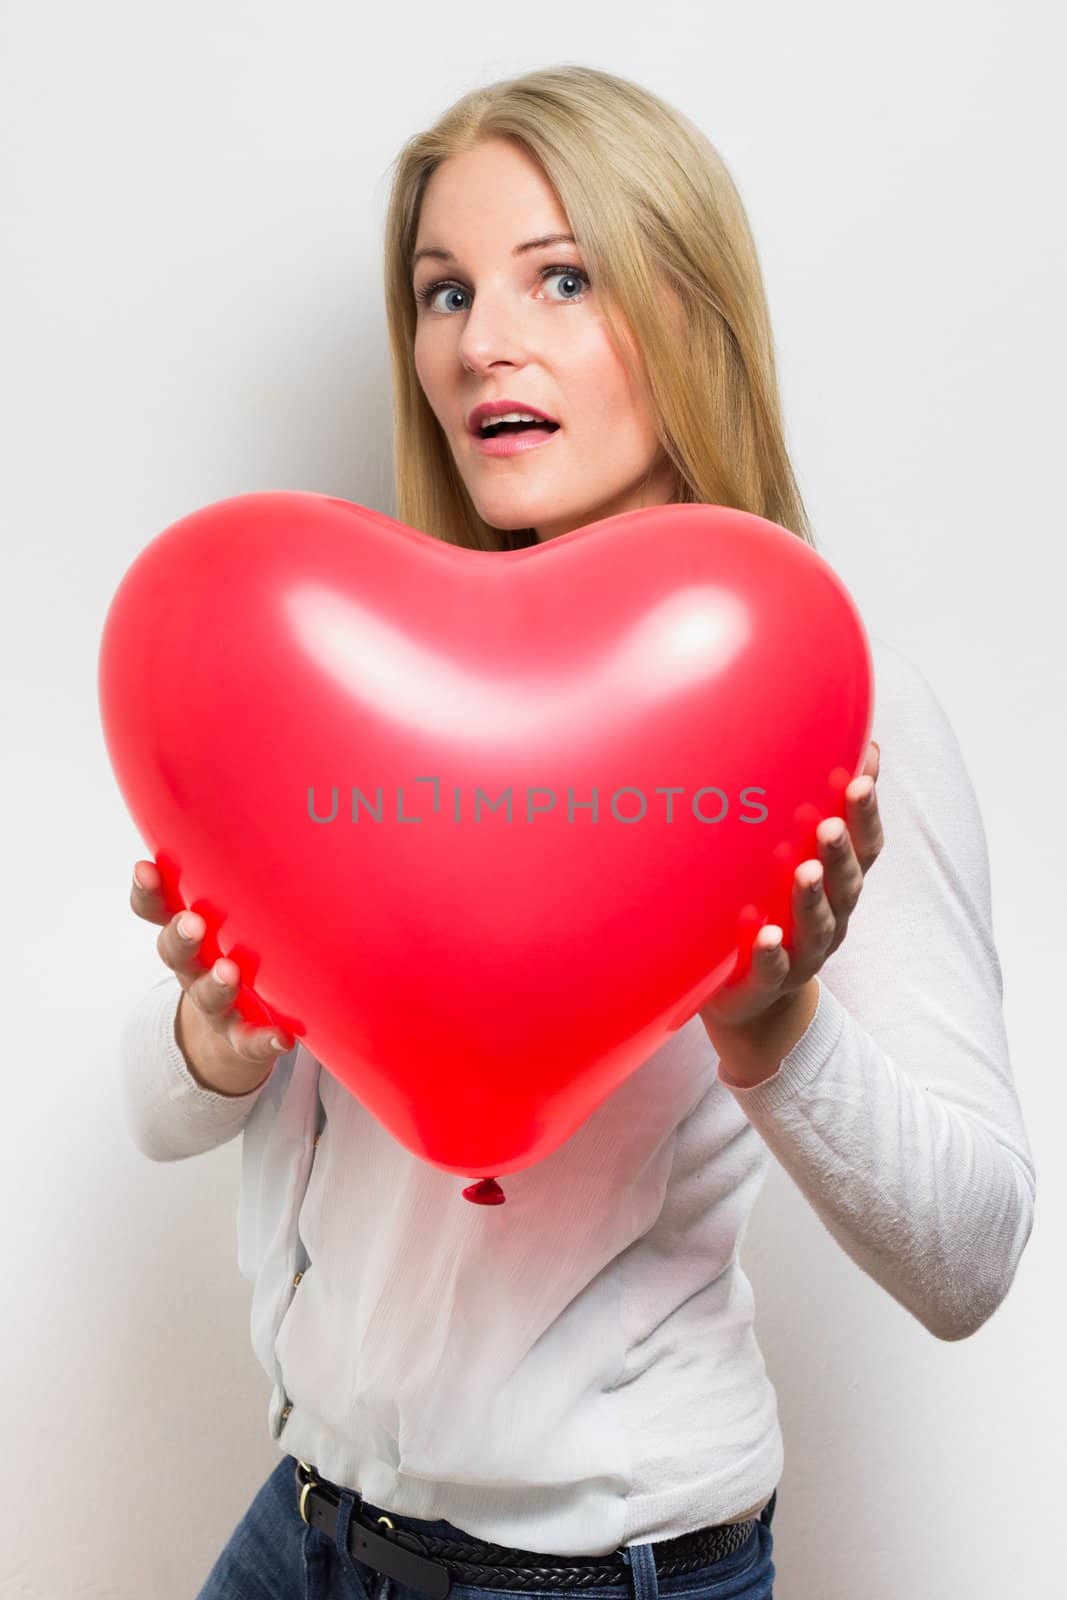 Surprised  caucasian woman holding a red heart balloon